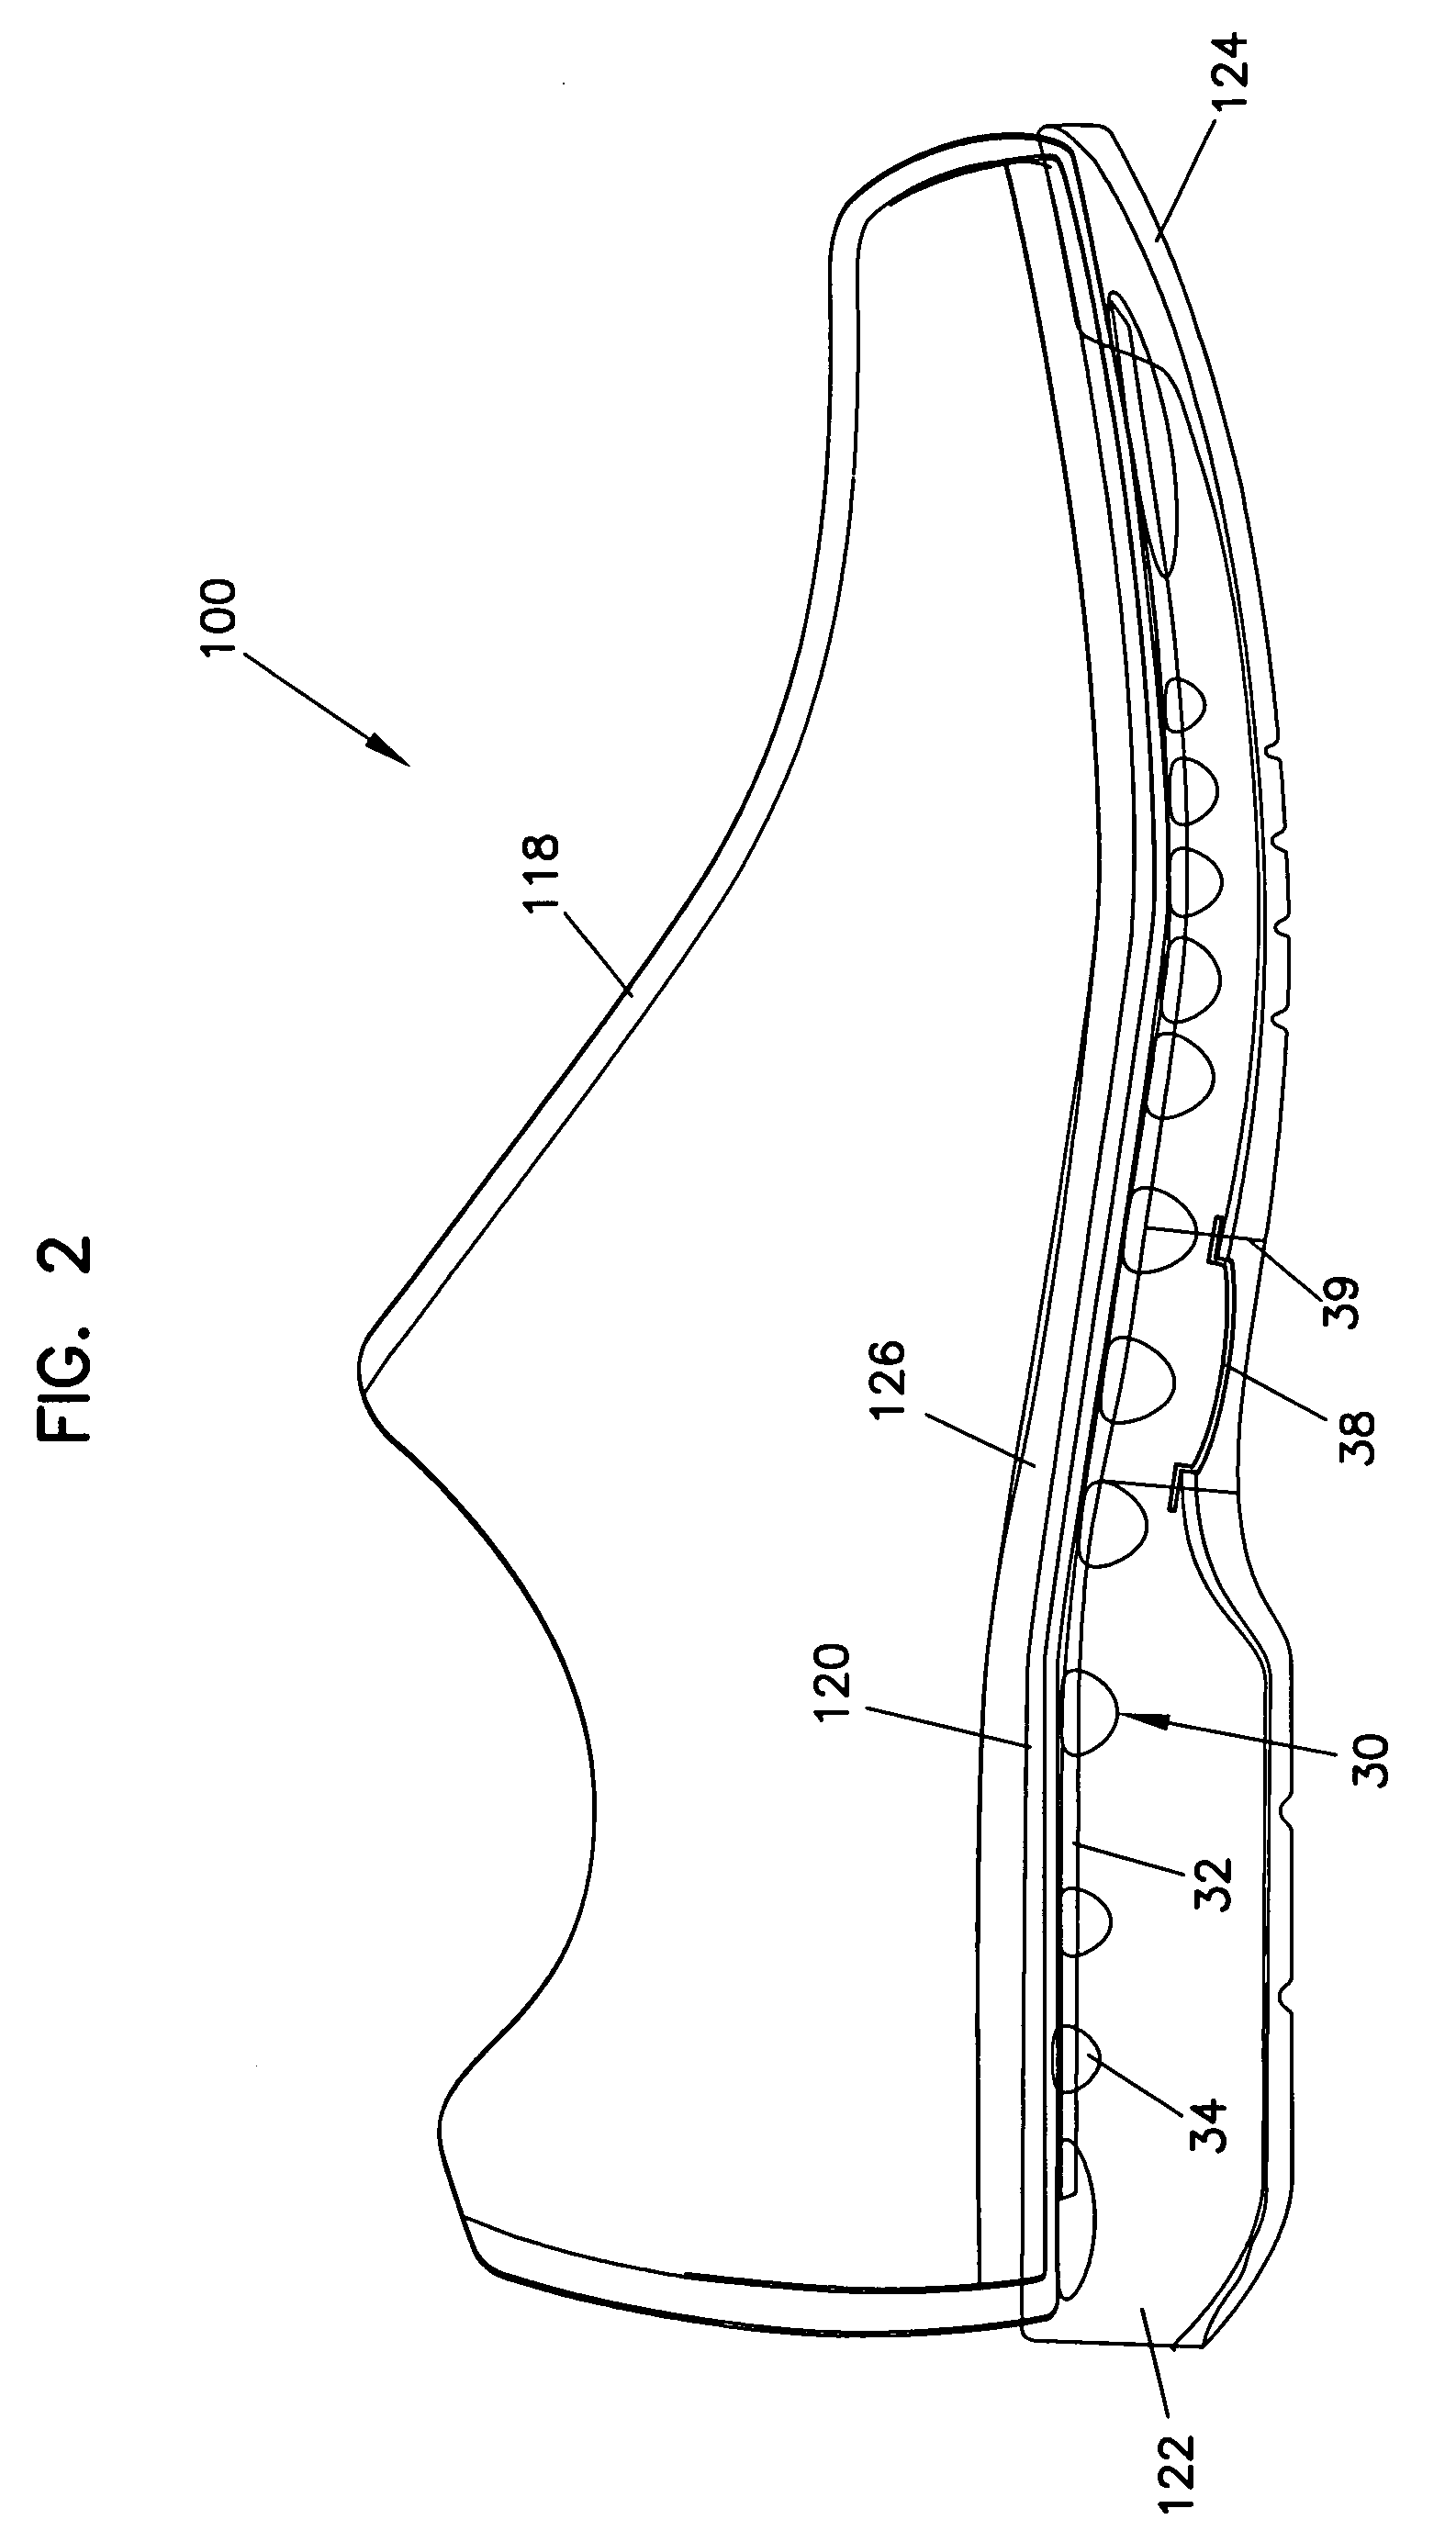 Integral spine structure for footwear